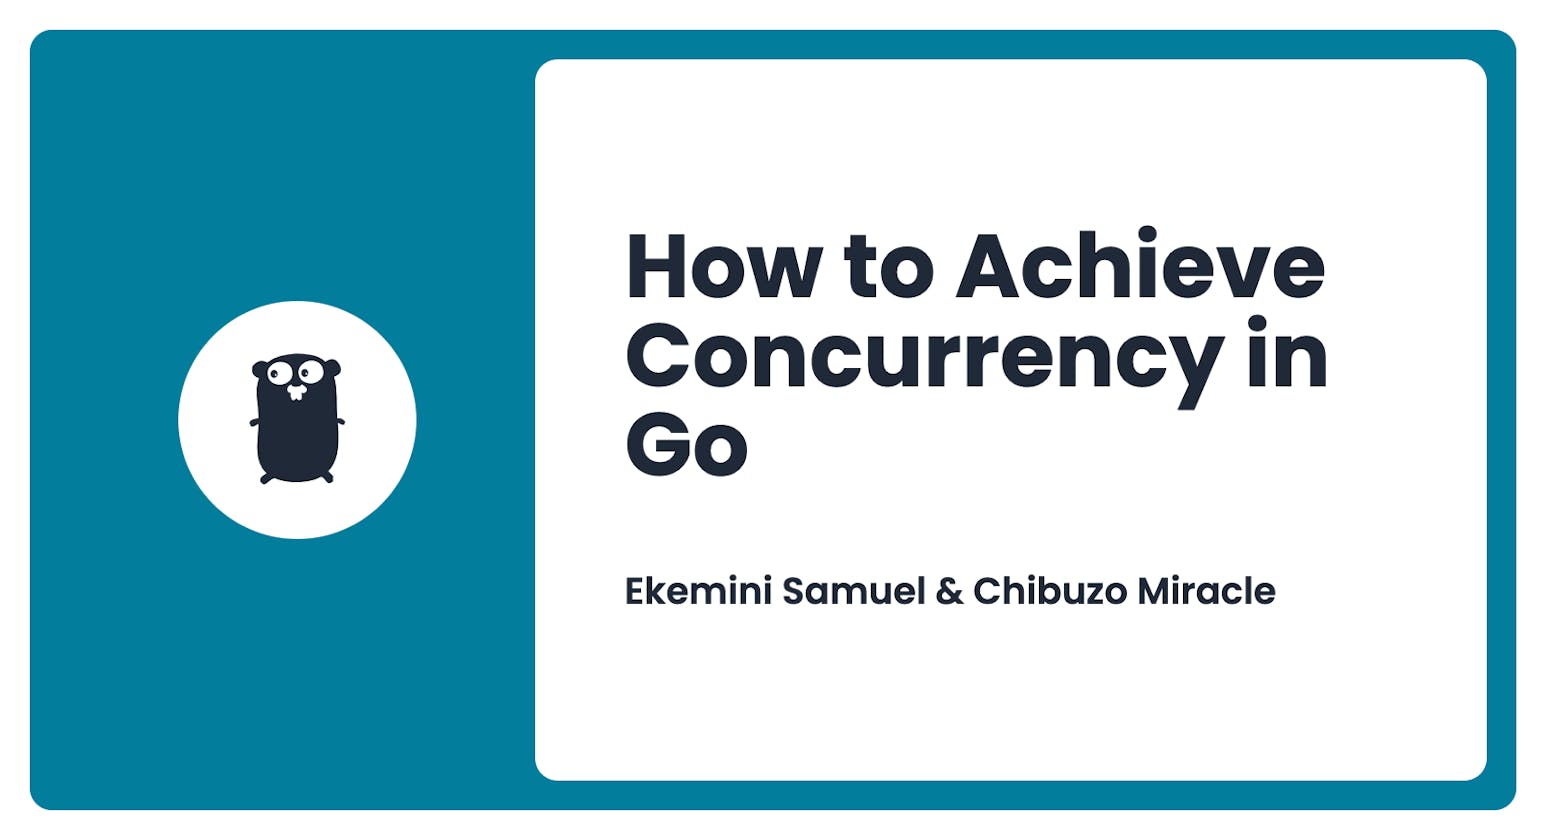 How to Achieve Concurrency in Go